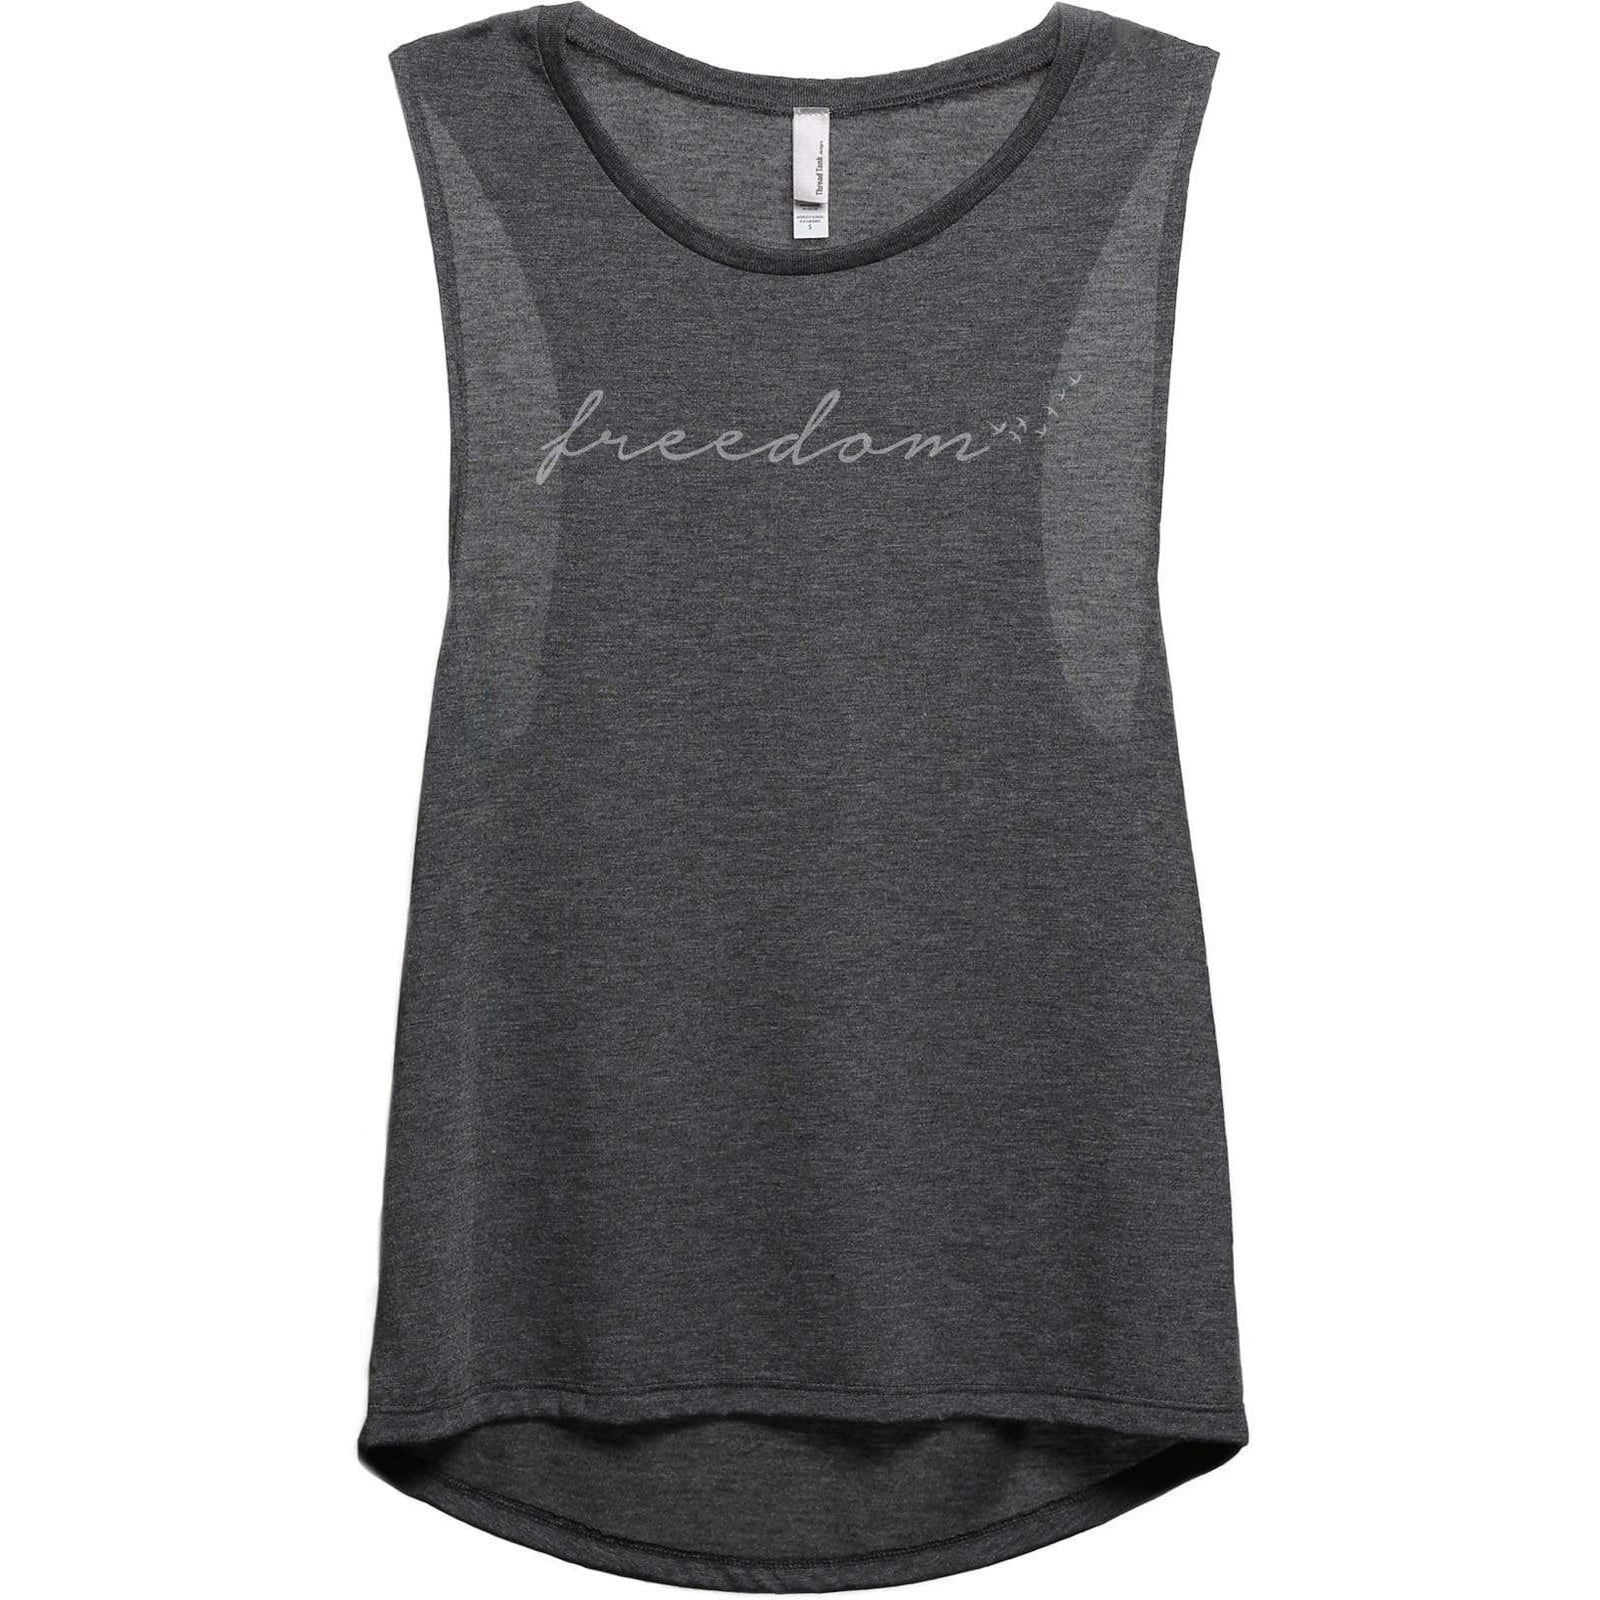 Freedome Script And Sunshine Women's Relaxed Muscle Tank Tee Charcoal